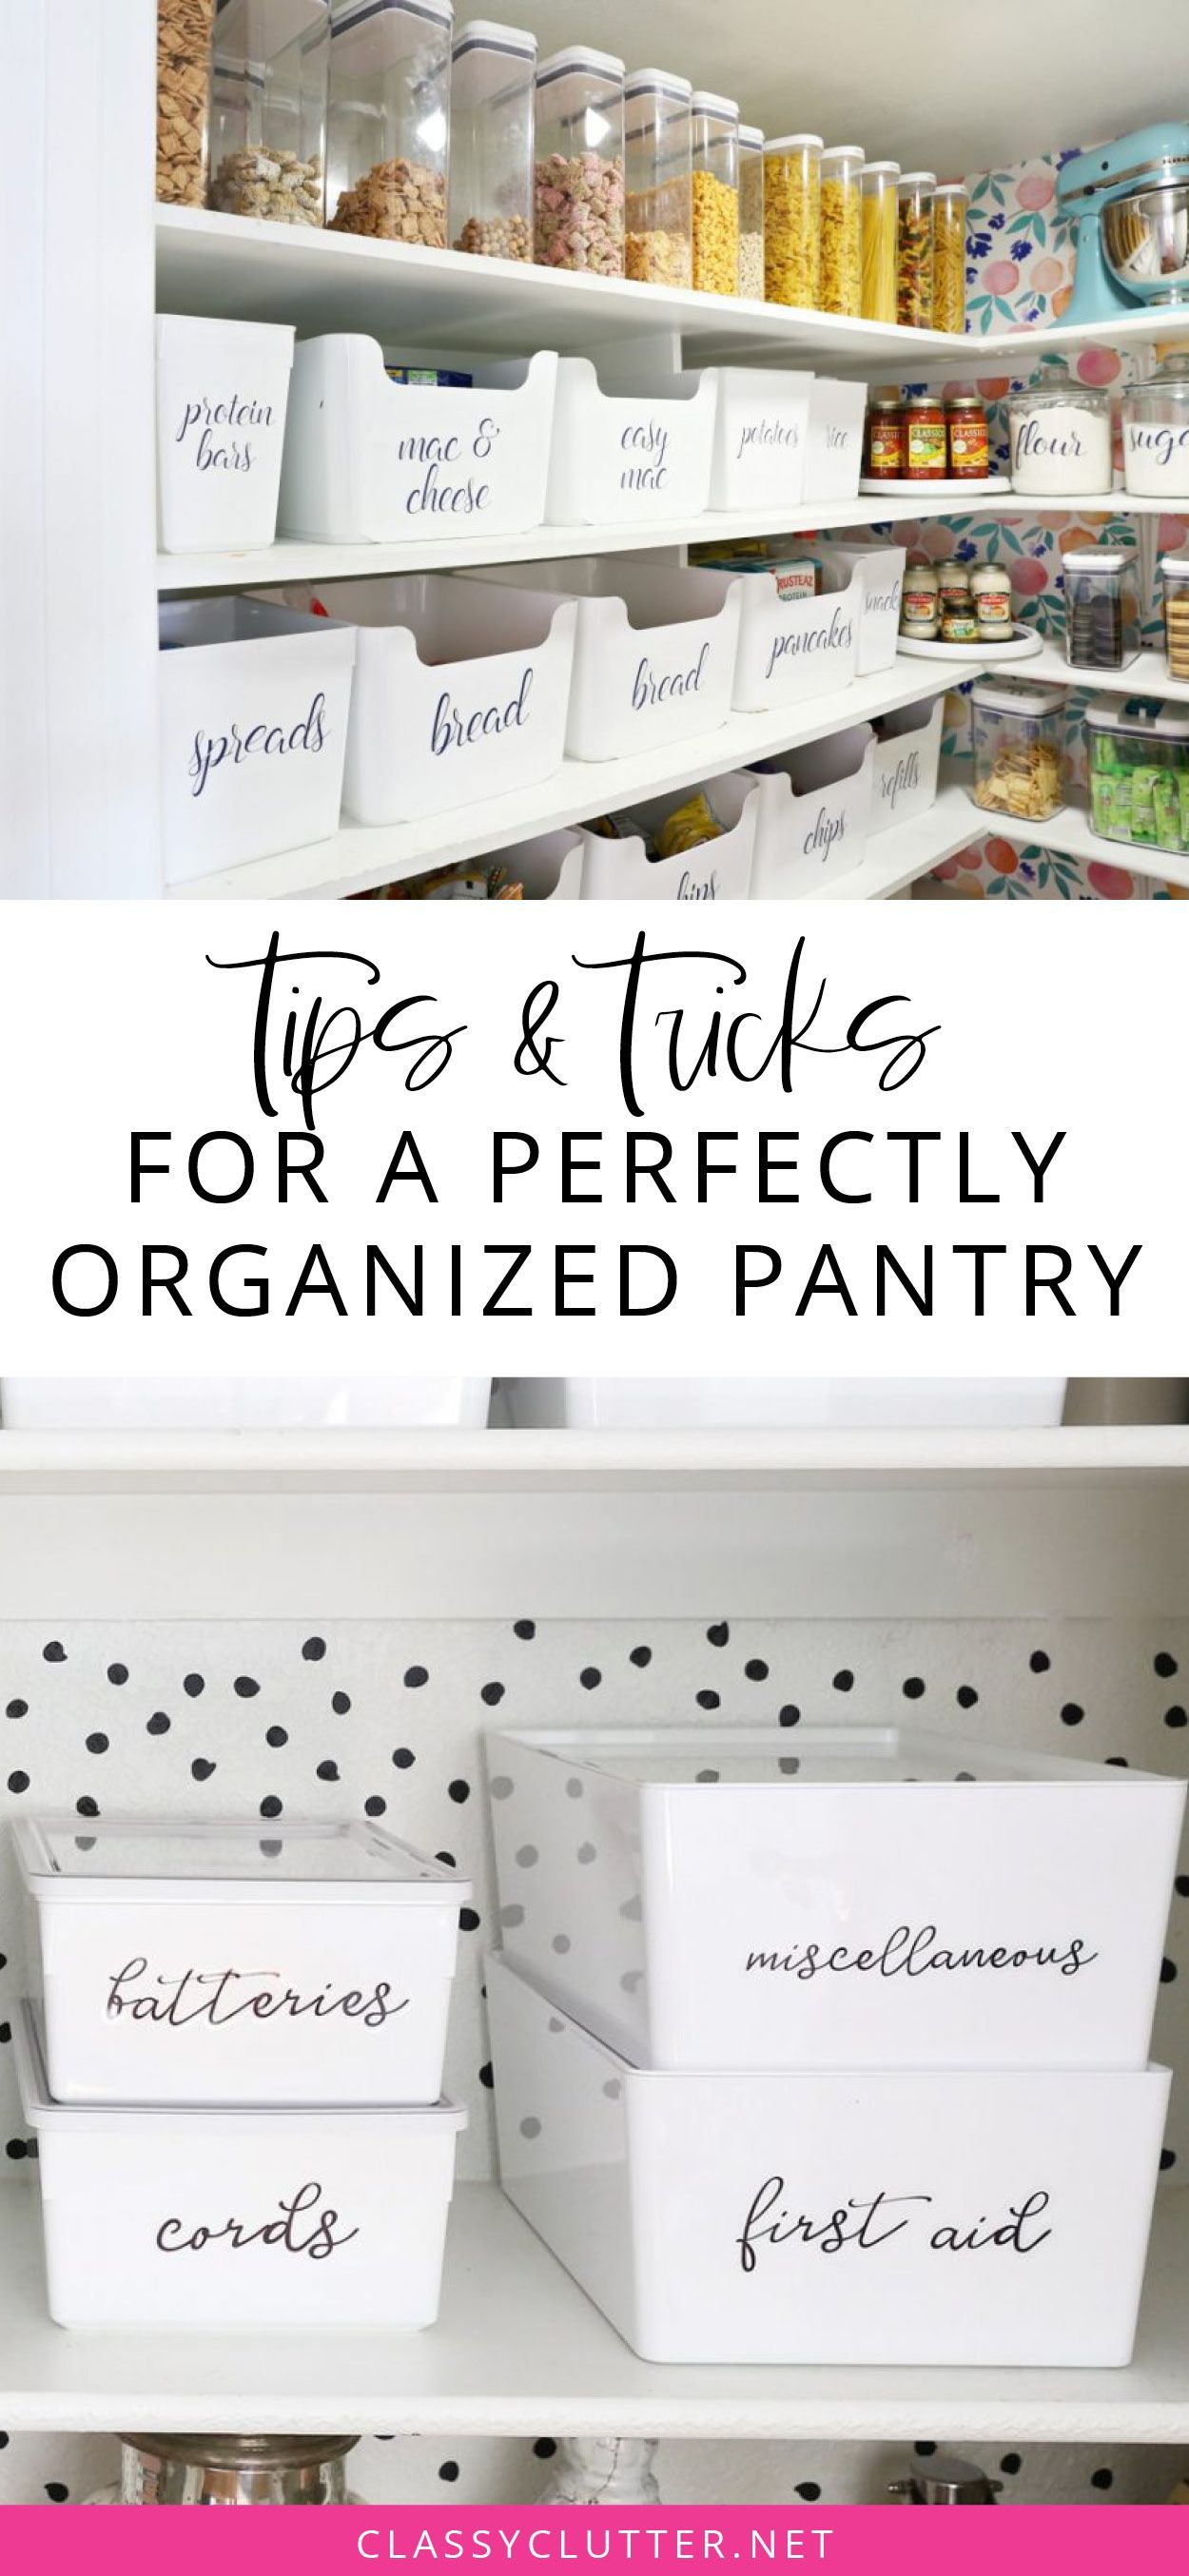 Tips & Tricks for a Perfectly Organized Pantry -   19 diy Kitchen tips ideas